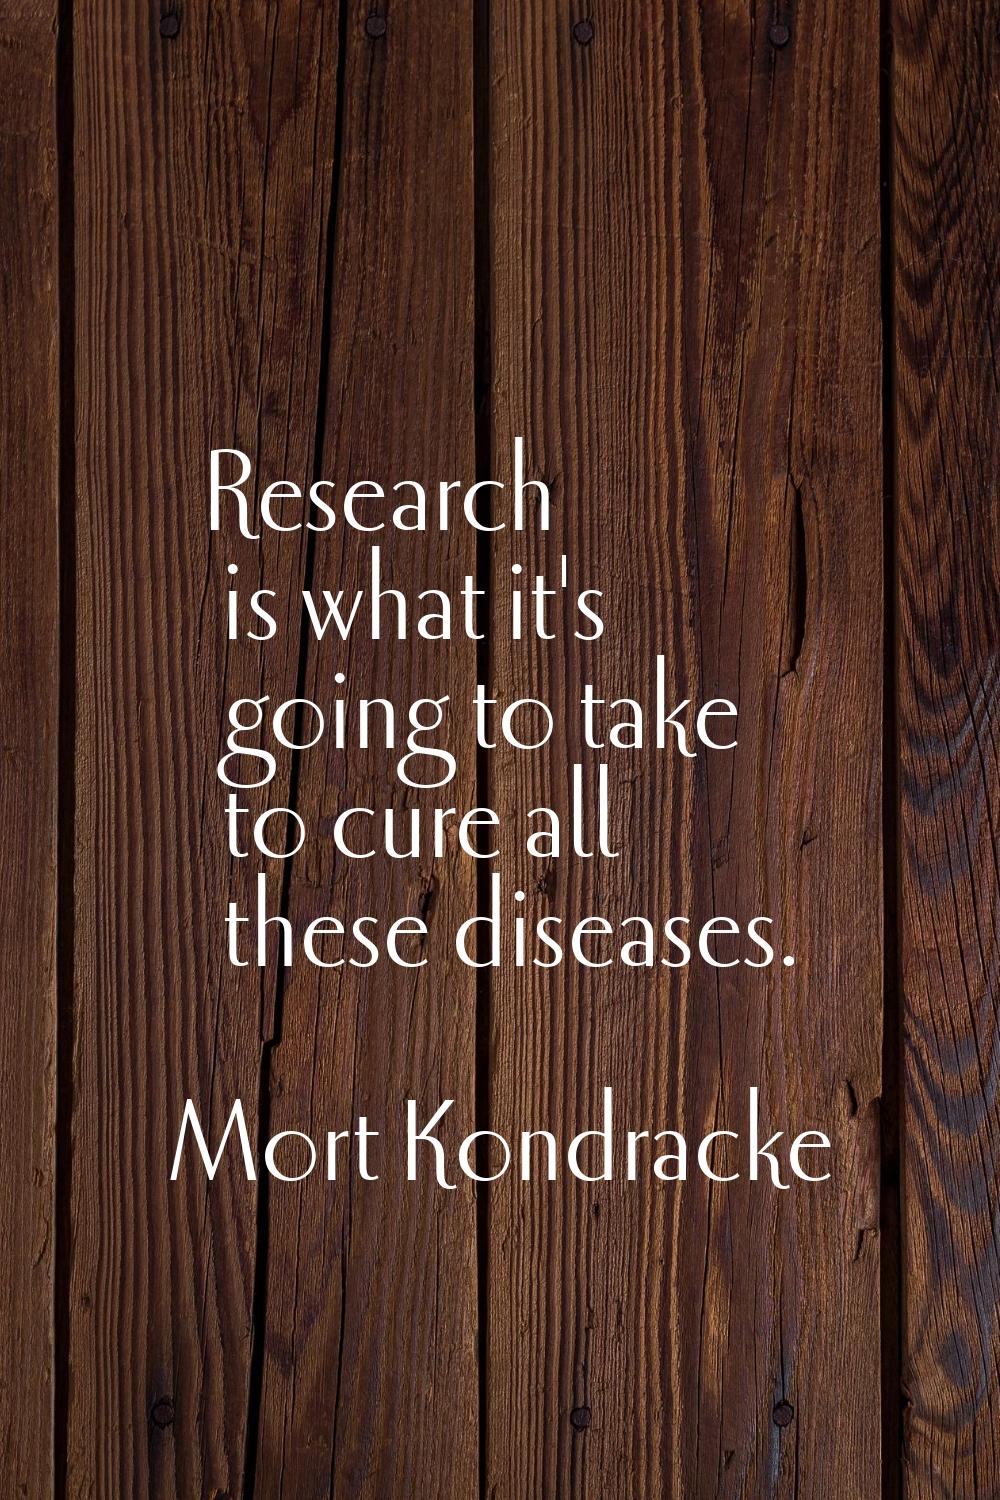 Research is what it's going to take to cure all these diseases.